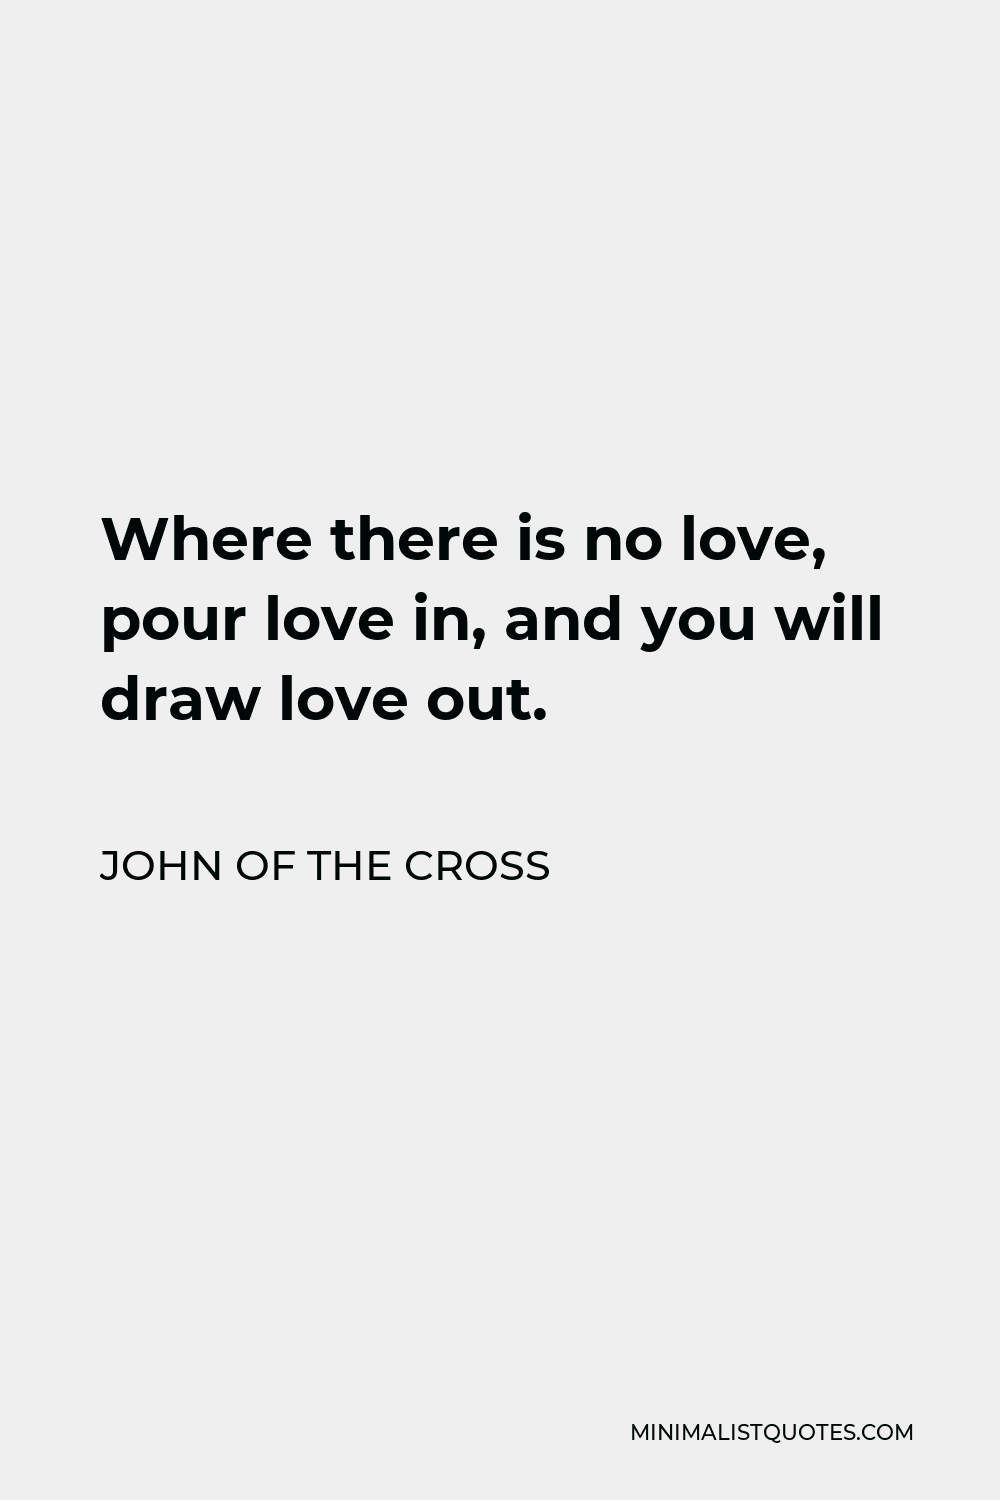 John of the Cross Quote - Where there is no love, pour love in, and you will draw love out.